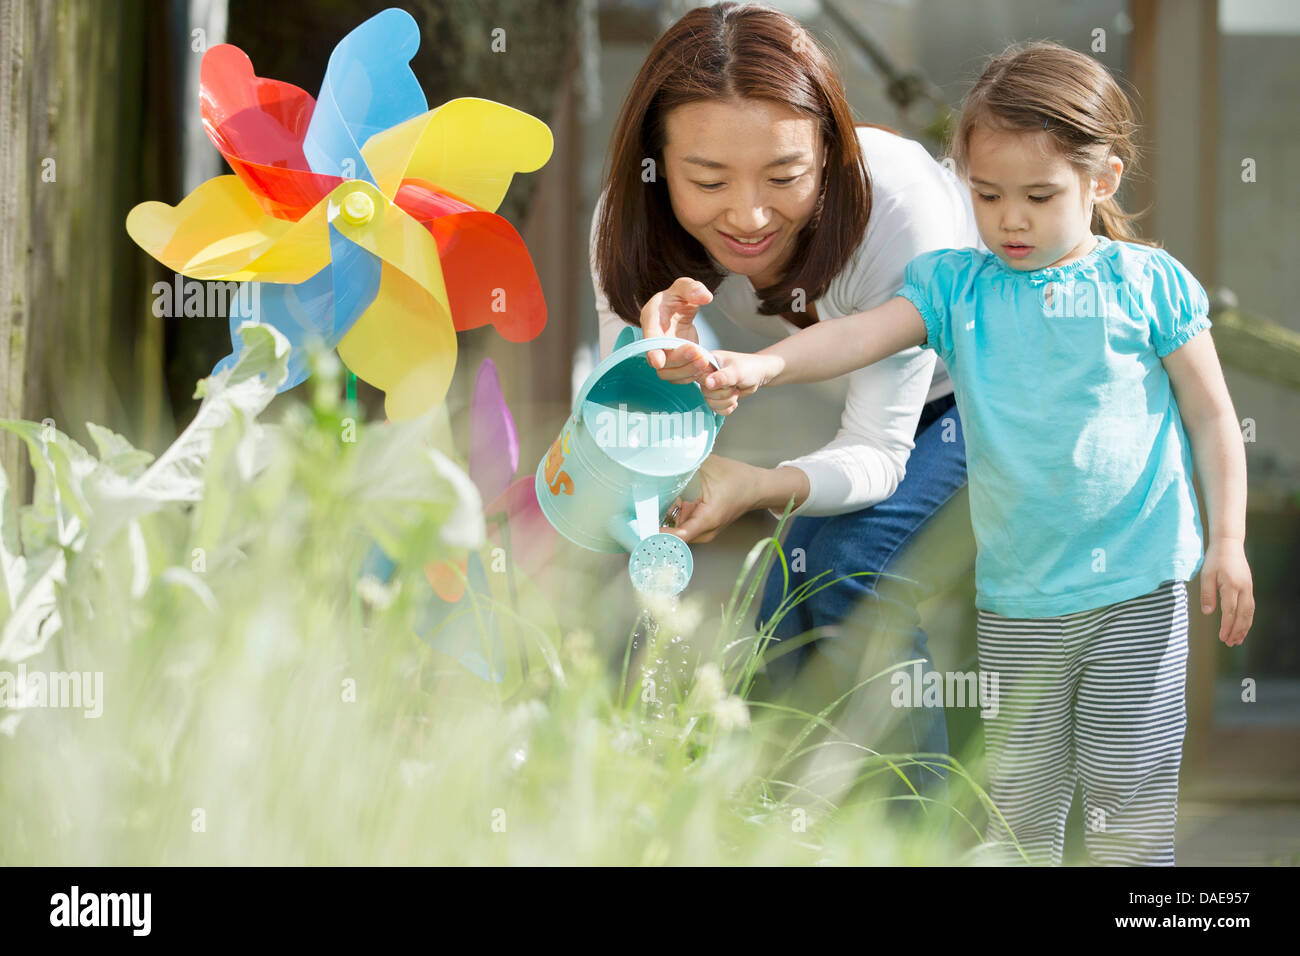 Mother and daughter with watering can and toy windmill Stock Photo